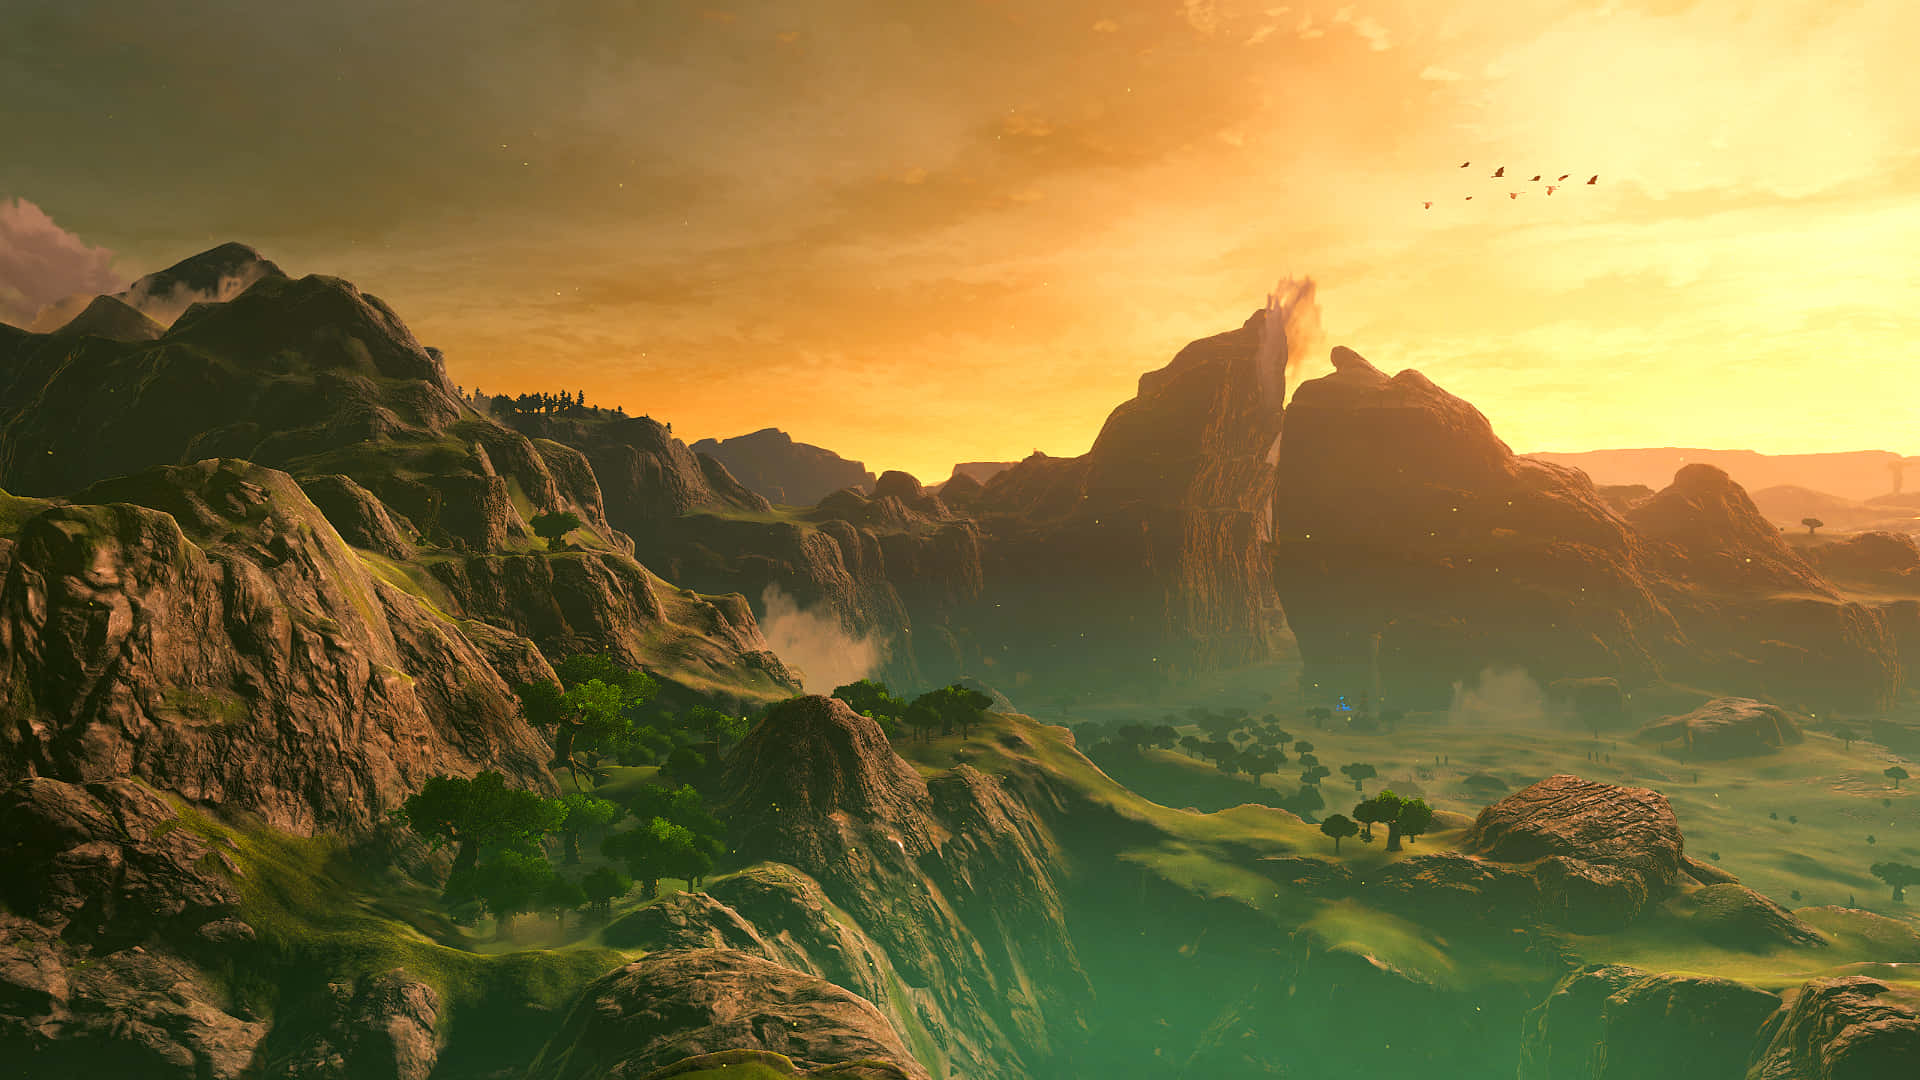 Epic view of a mystical landscape in Breath of the Wild